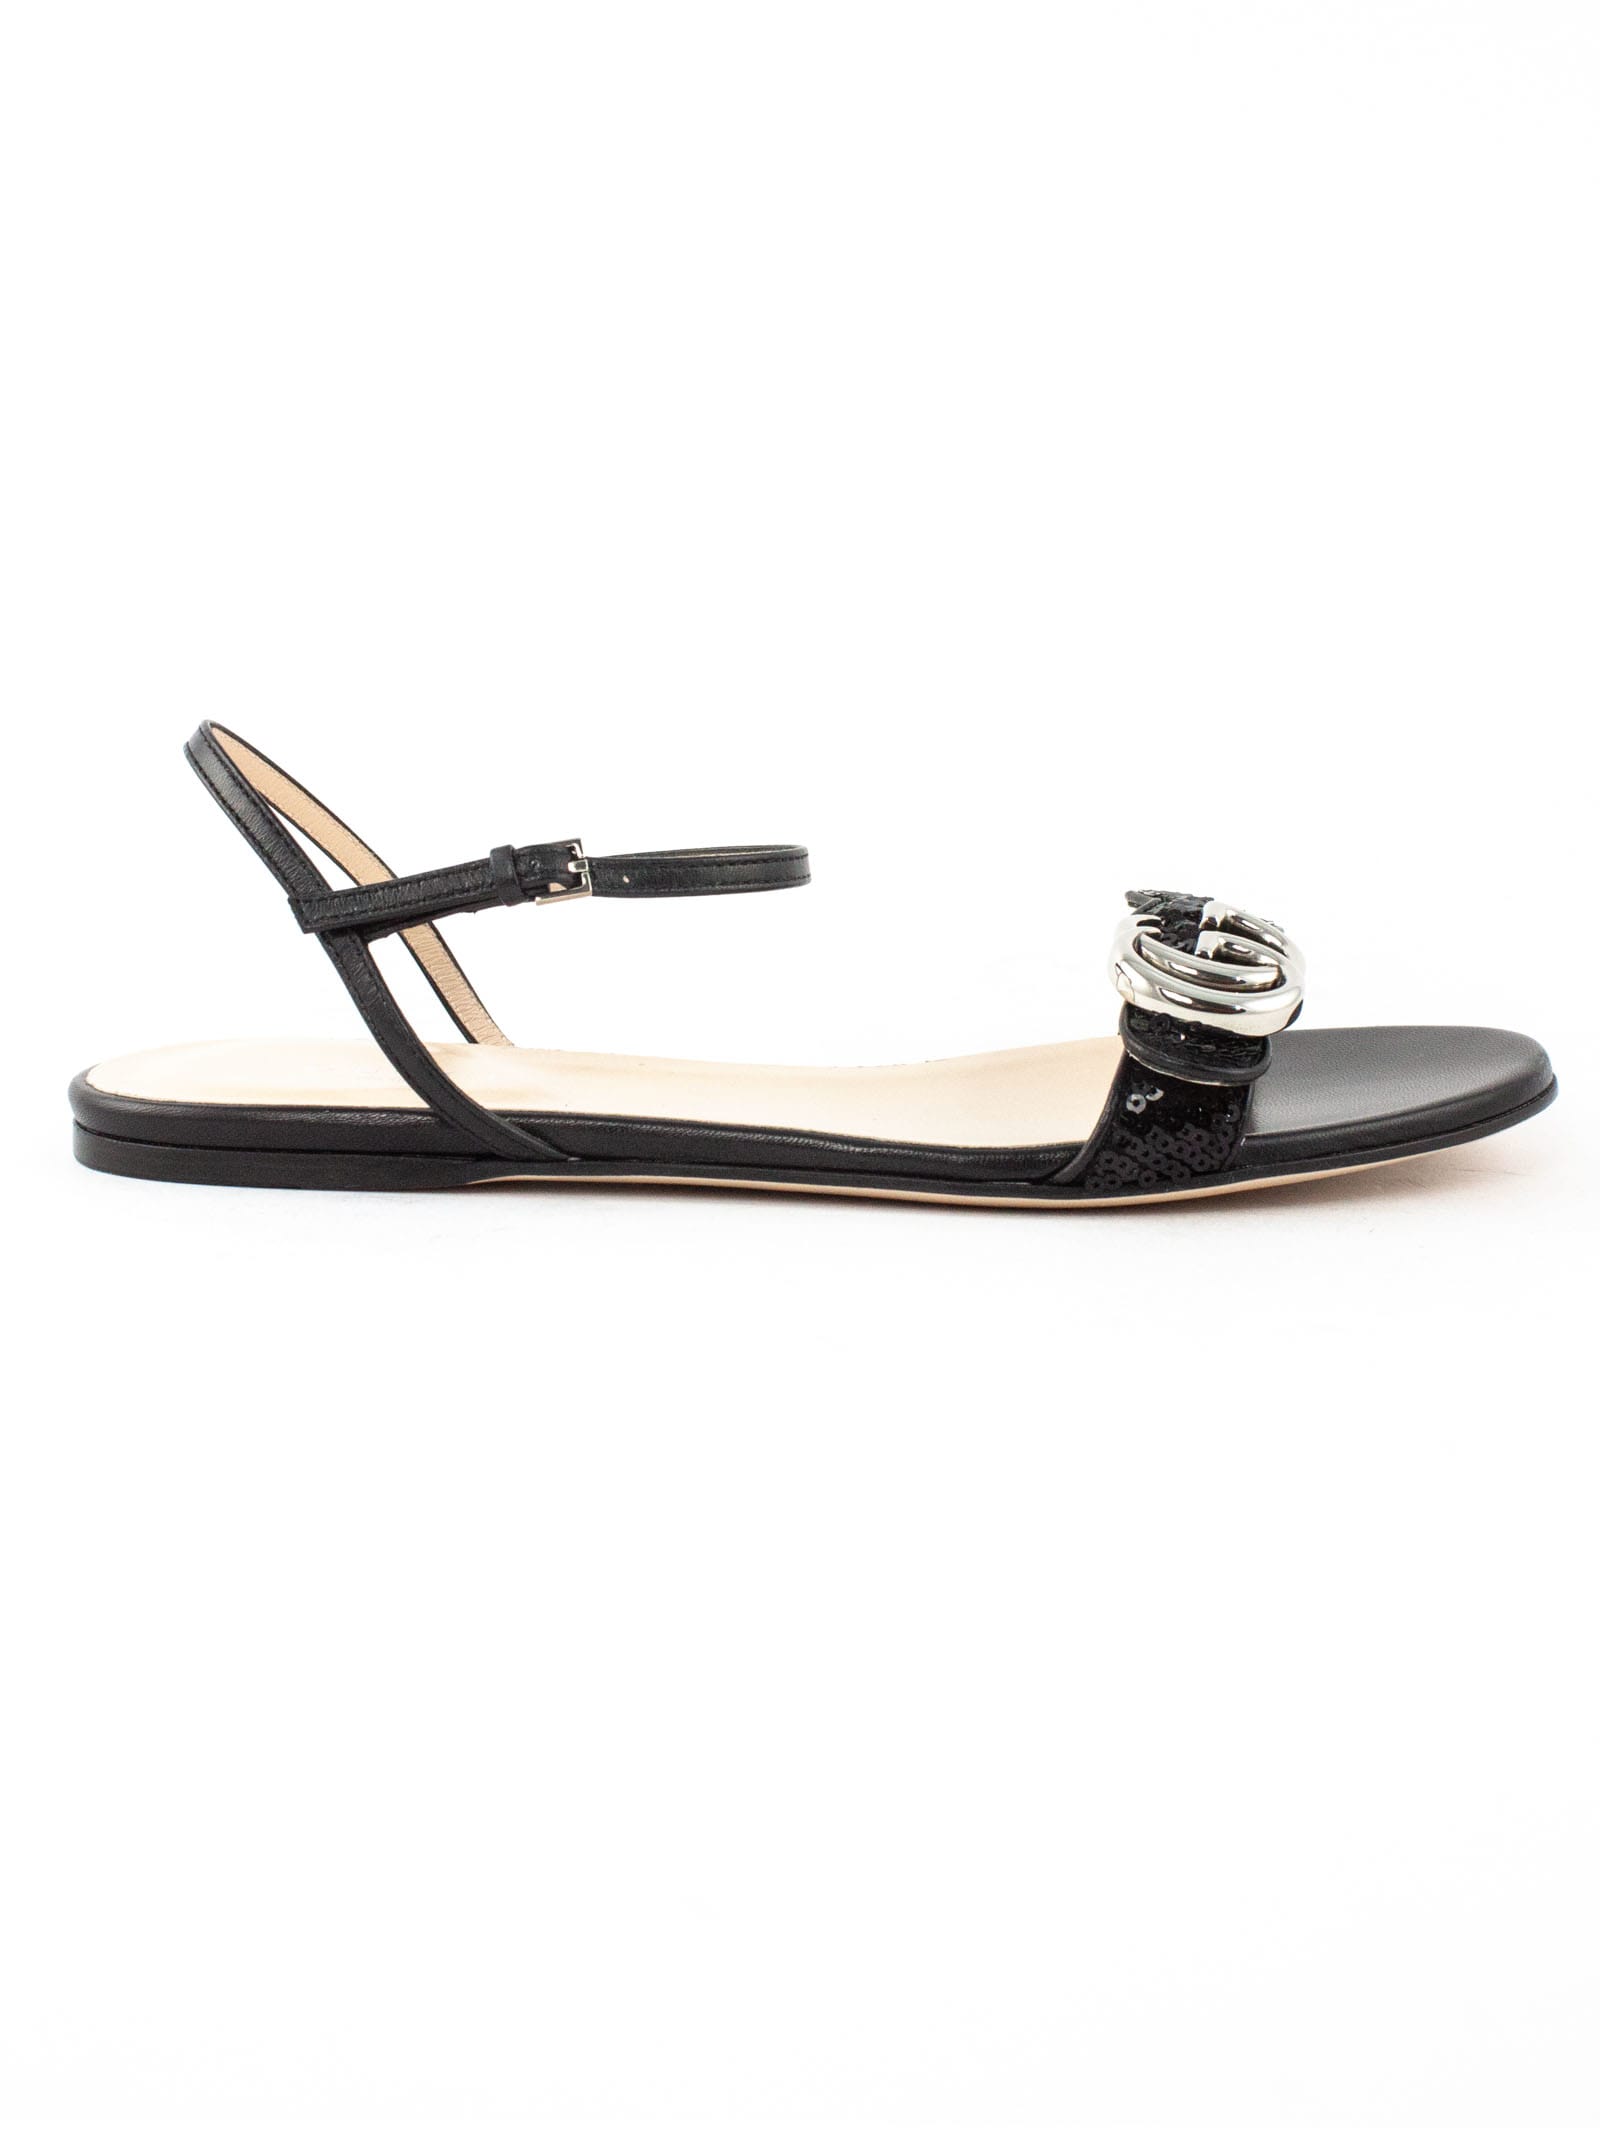 Buy Gucci Black Leather Sandal online, shop Gucci shoes with free shipping